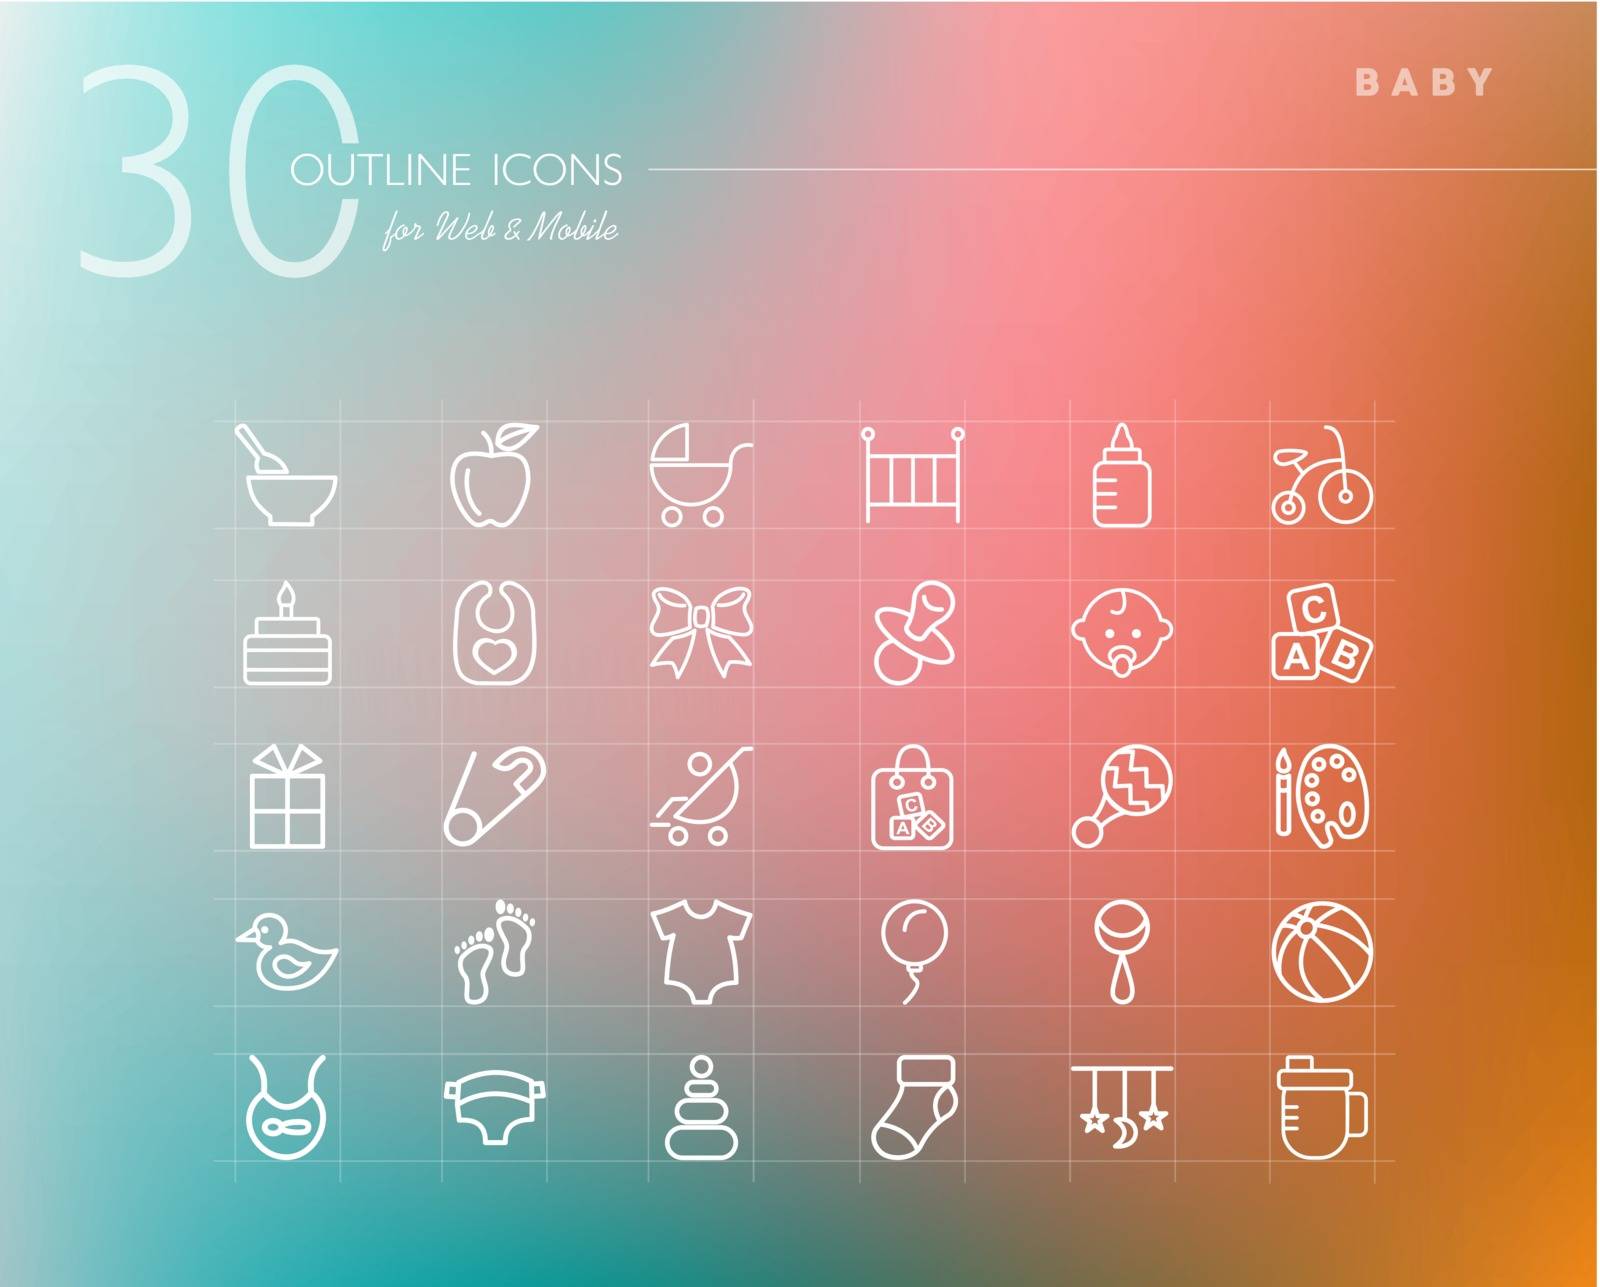 Baby shower outline icons set for web and mobile app. EPS10 vector file organized in layers for easy editing.